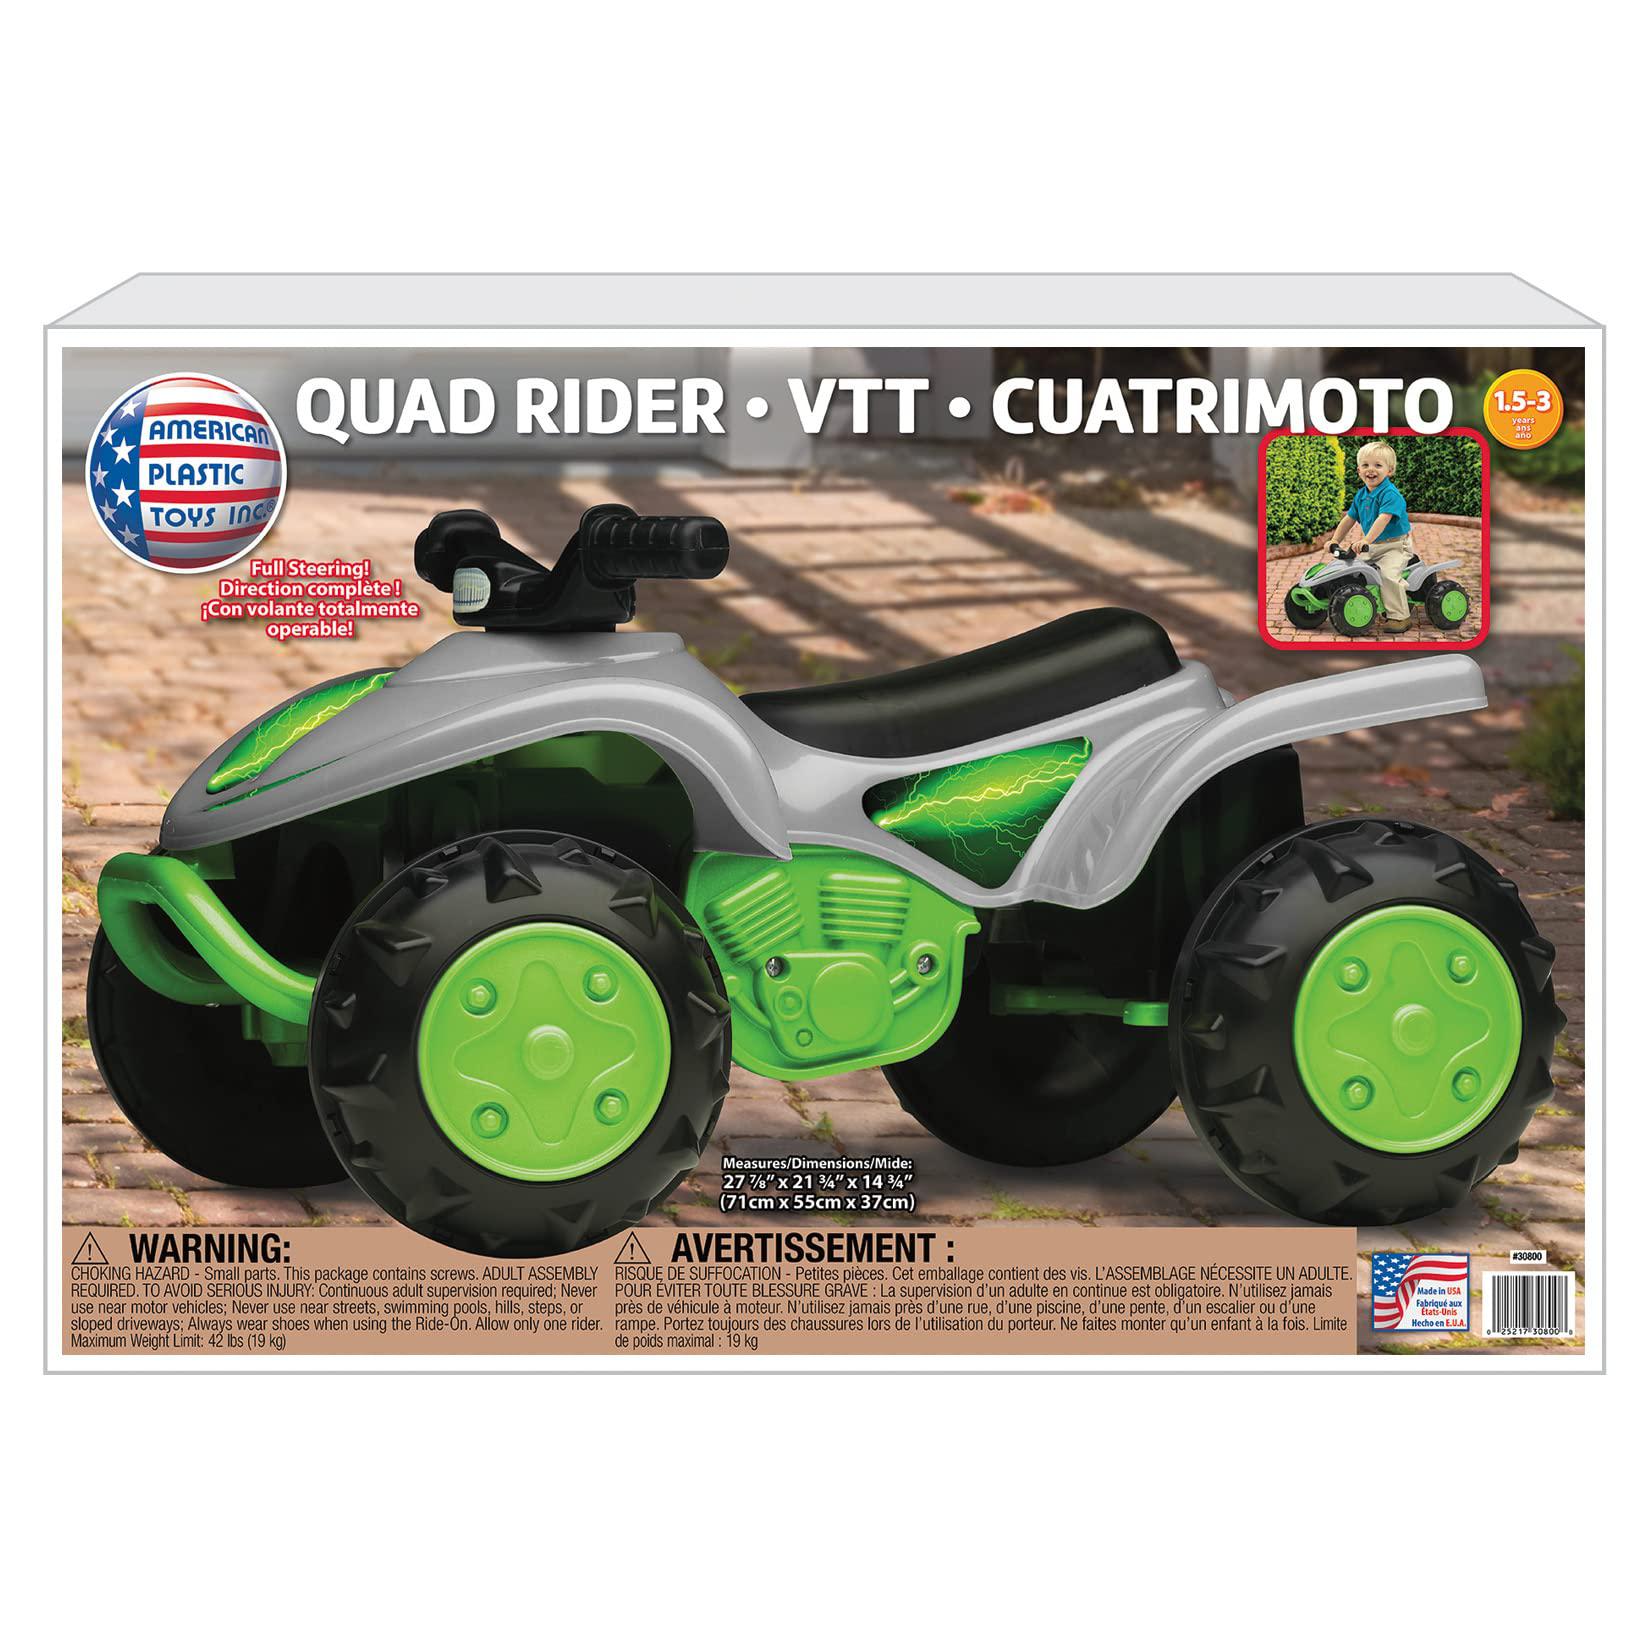 American Plastic Toys quad rider foot-to-floor atv, made in usa, fully functional steering, rugged off-road styling, knobby wheels, sturdy, green, 